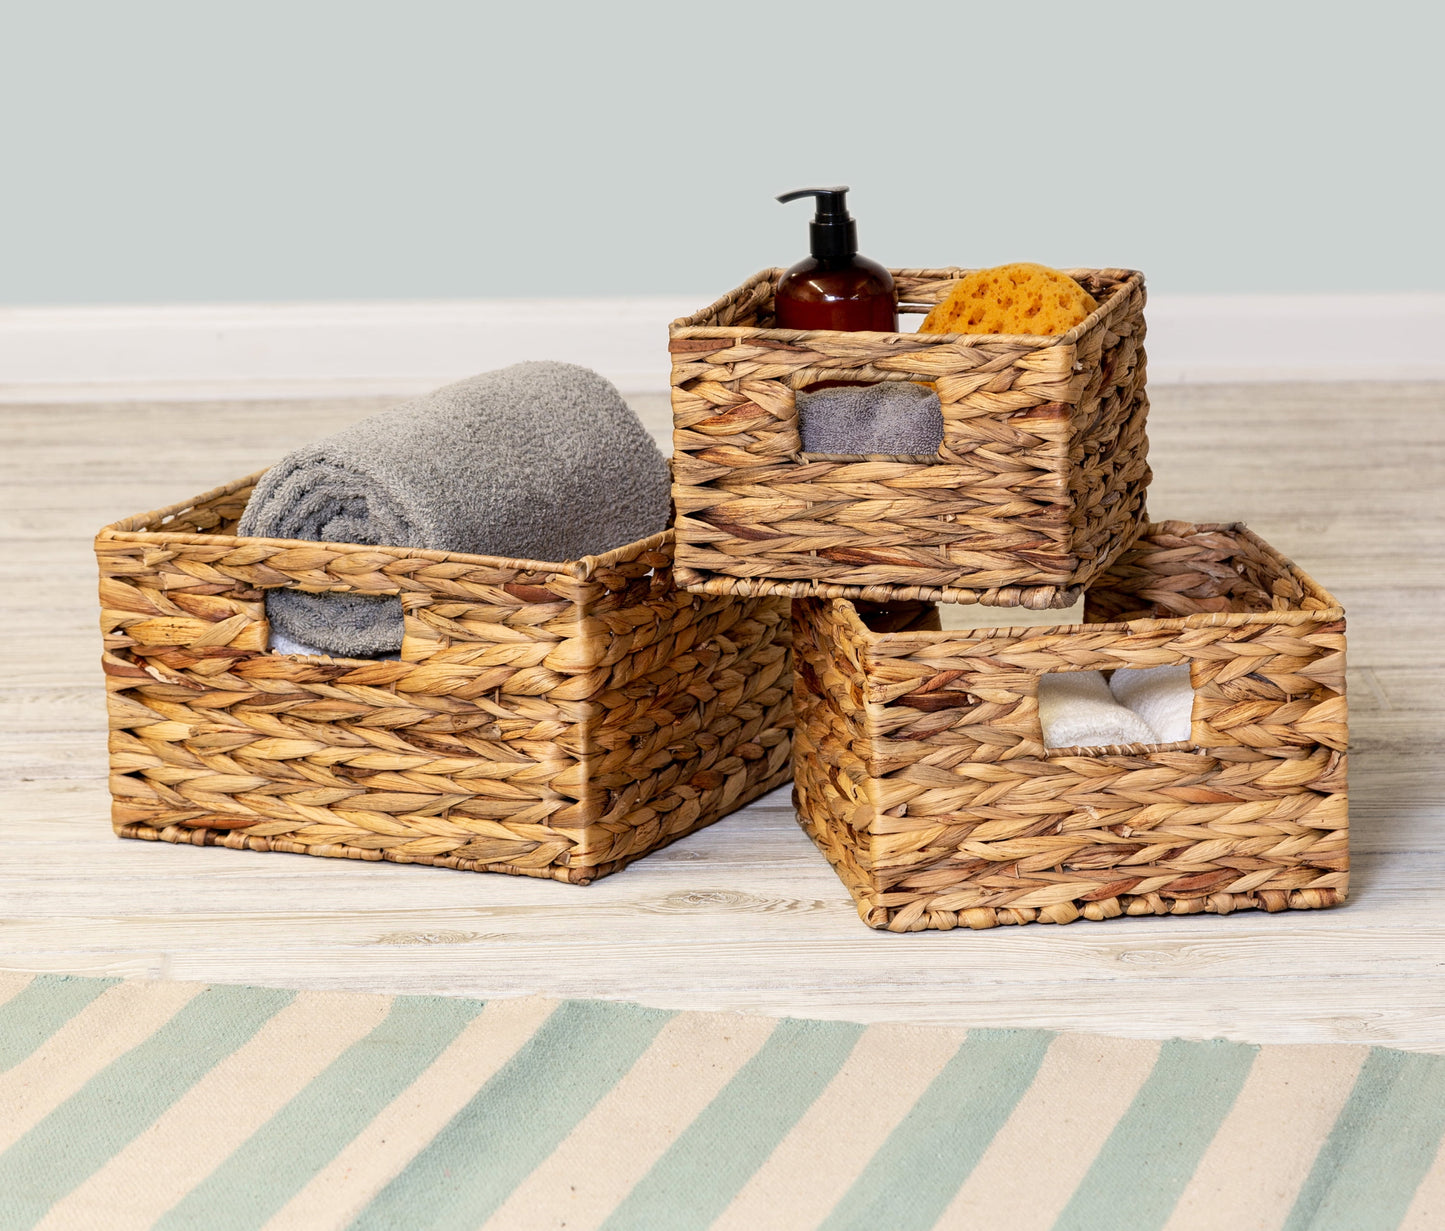 Honey-Can-Do Set of 3 Square Nesting Wicker Baskets with Handles, Natural